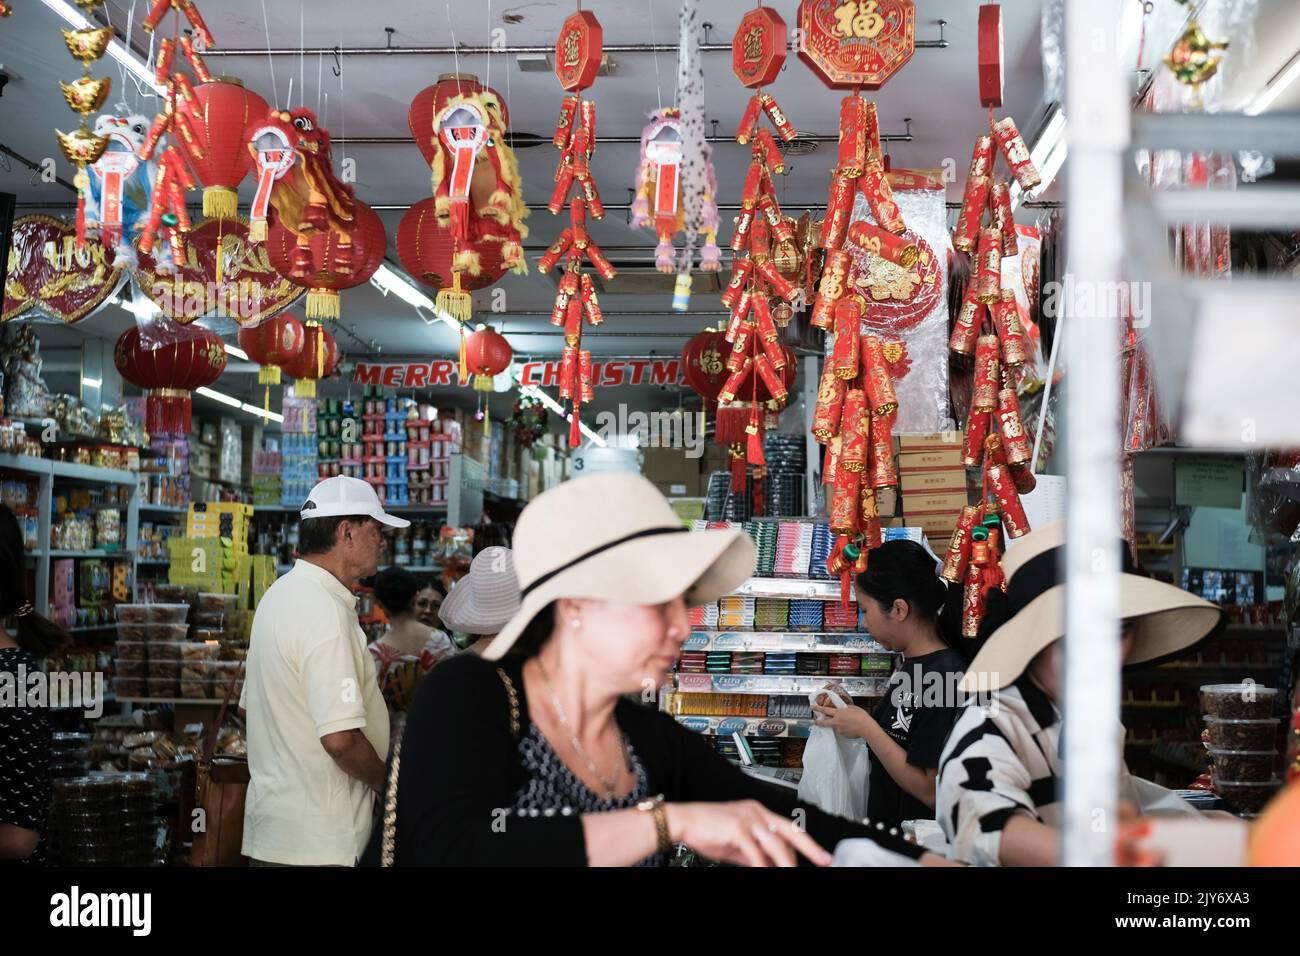 Lunar New Year decorations (firecrackers and red lanterns) for sale at an Asian grocer in Cabramatta — Sydney, Australia Stock Photo